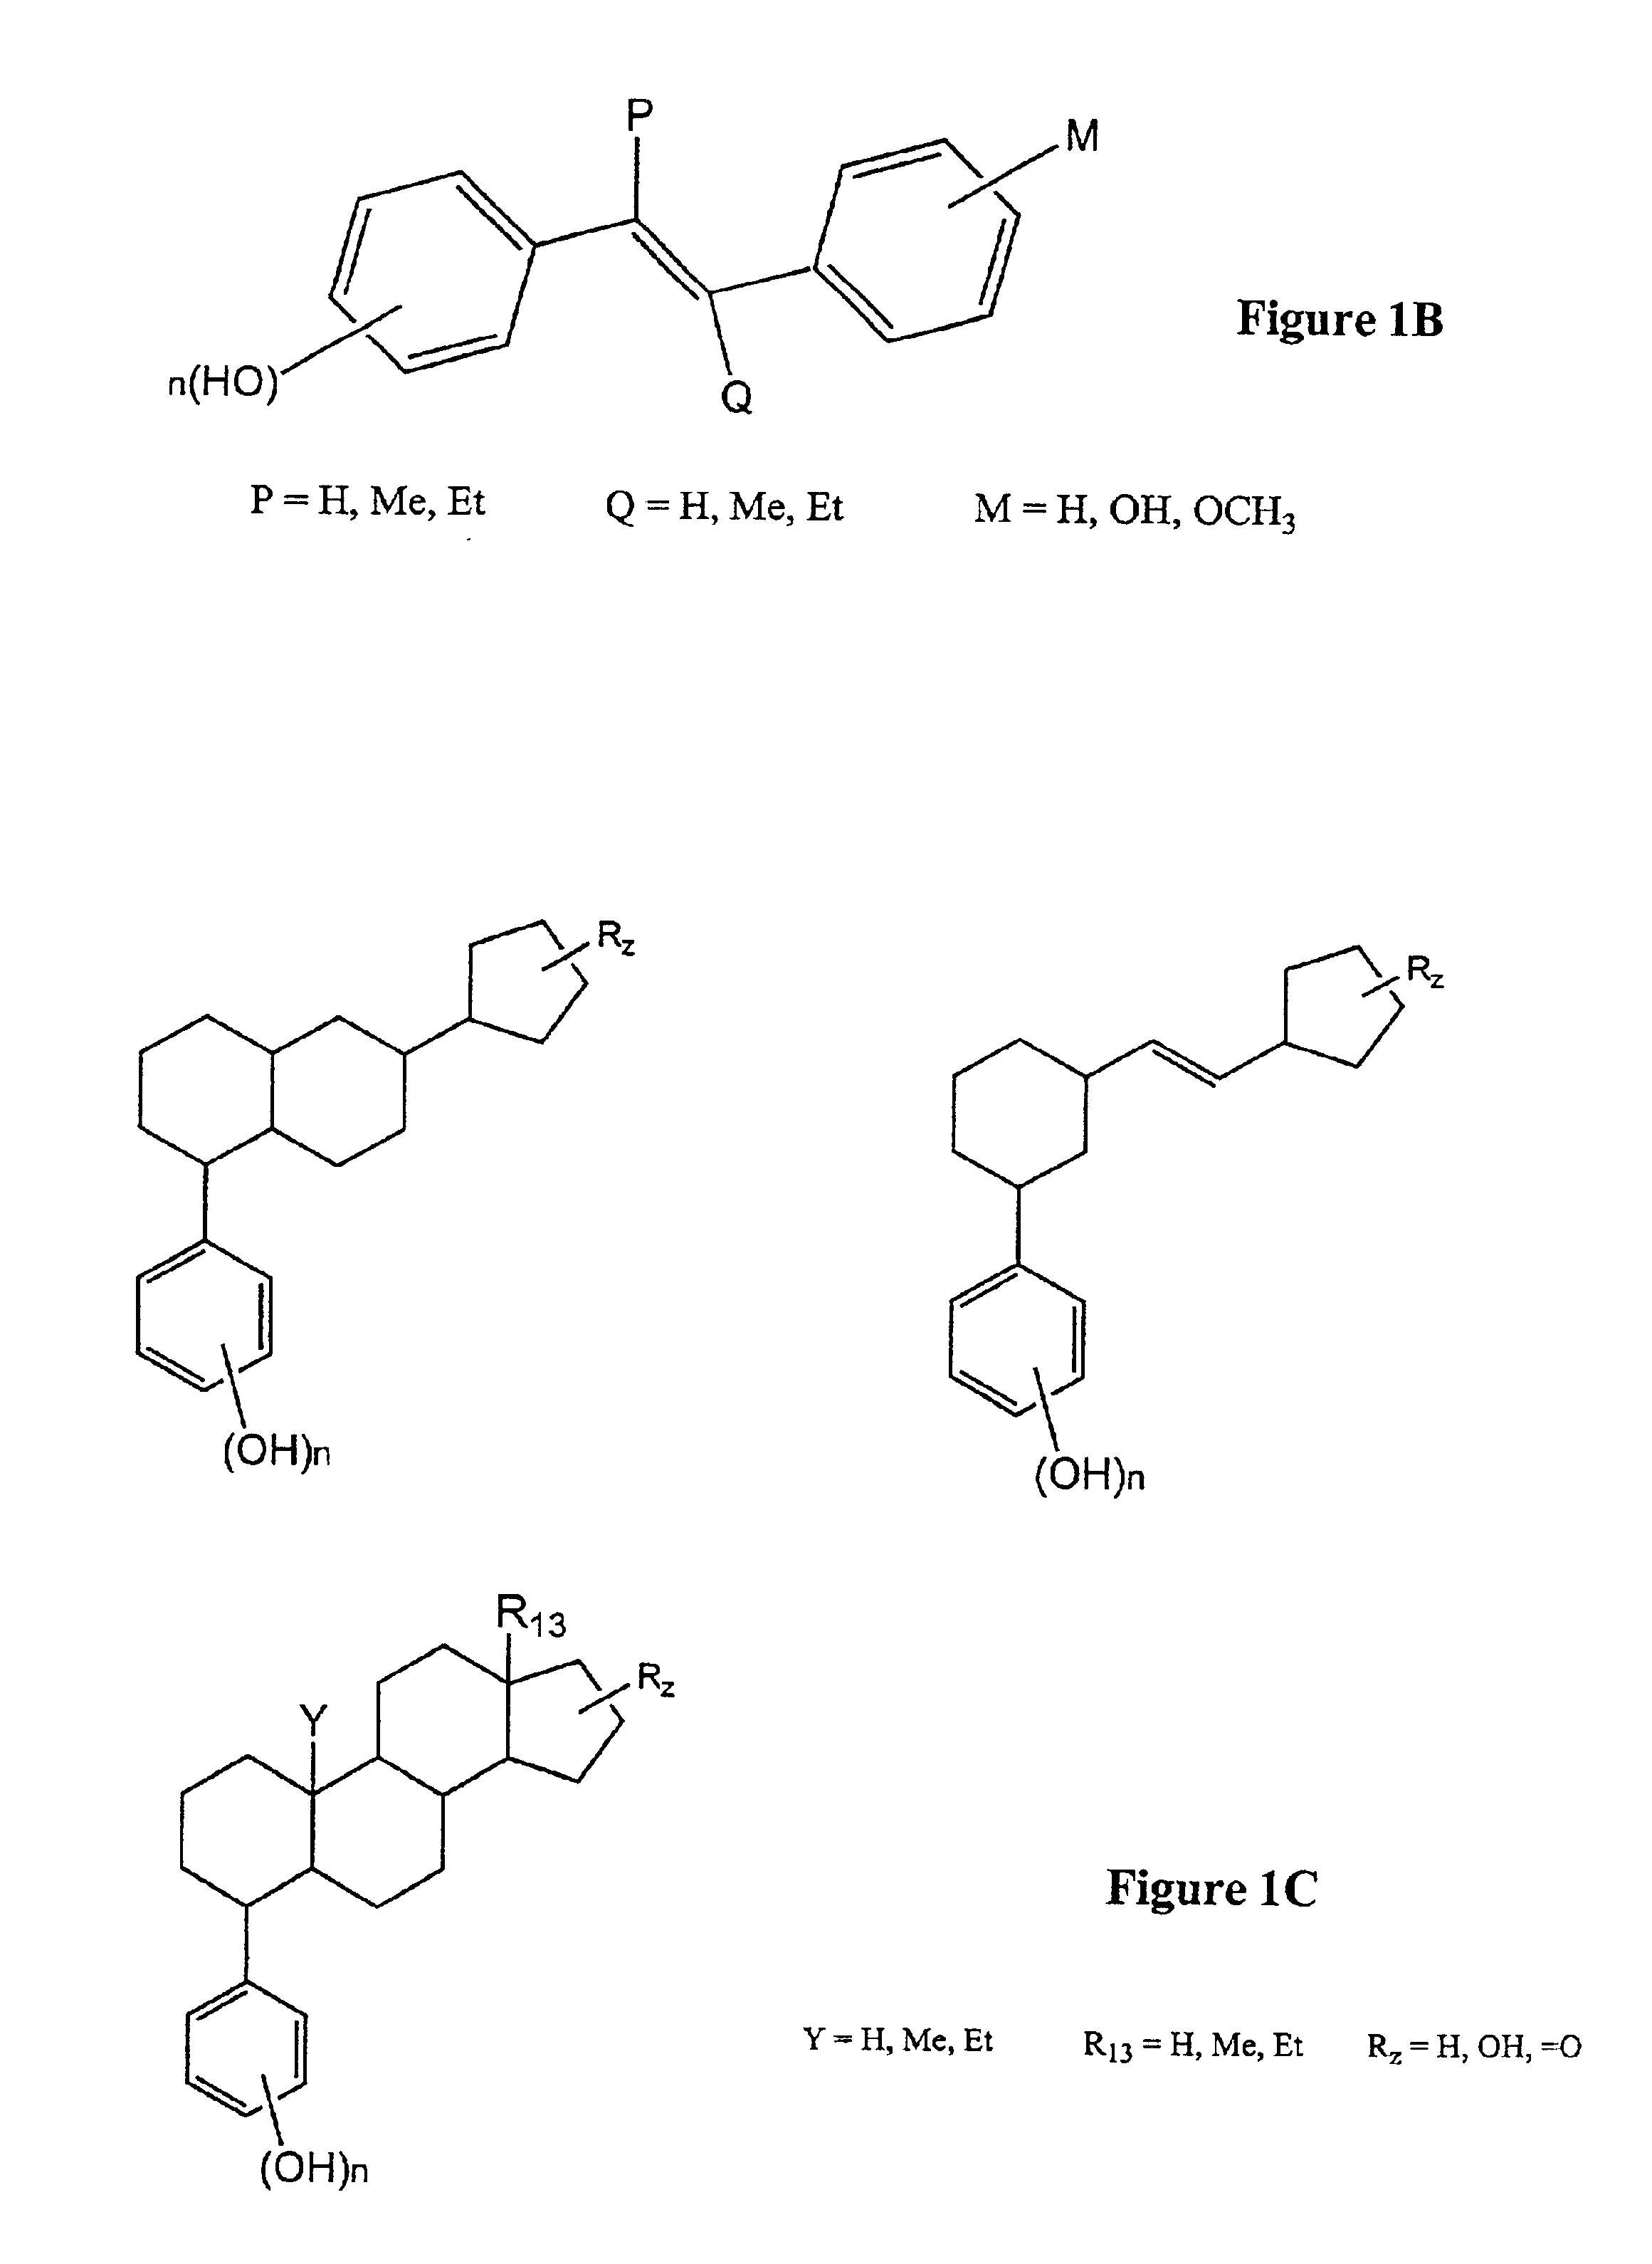 Modified, hydroxy-substituted aromatic structures having cytoprotective activity